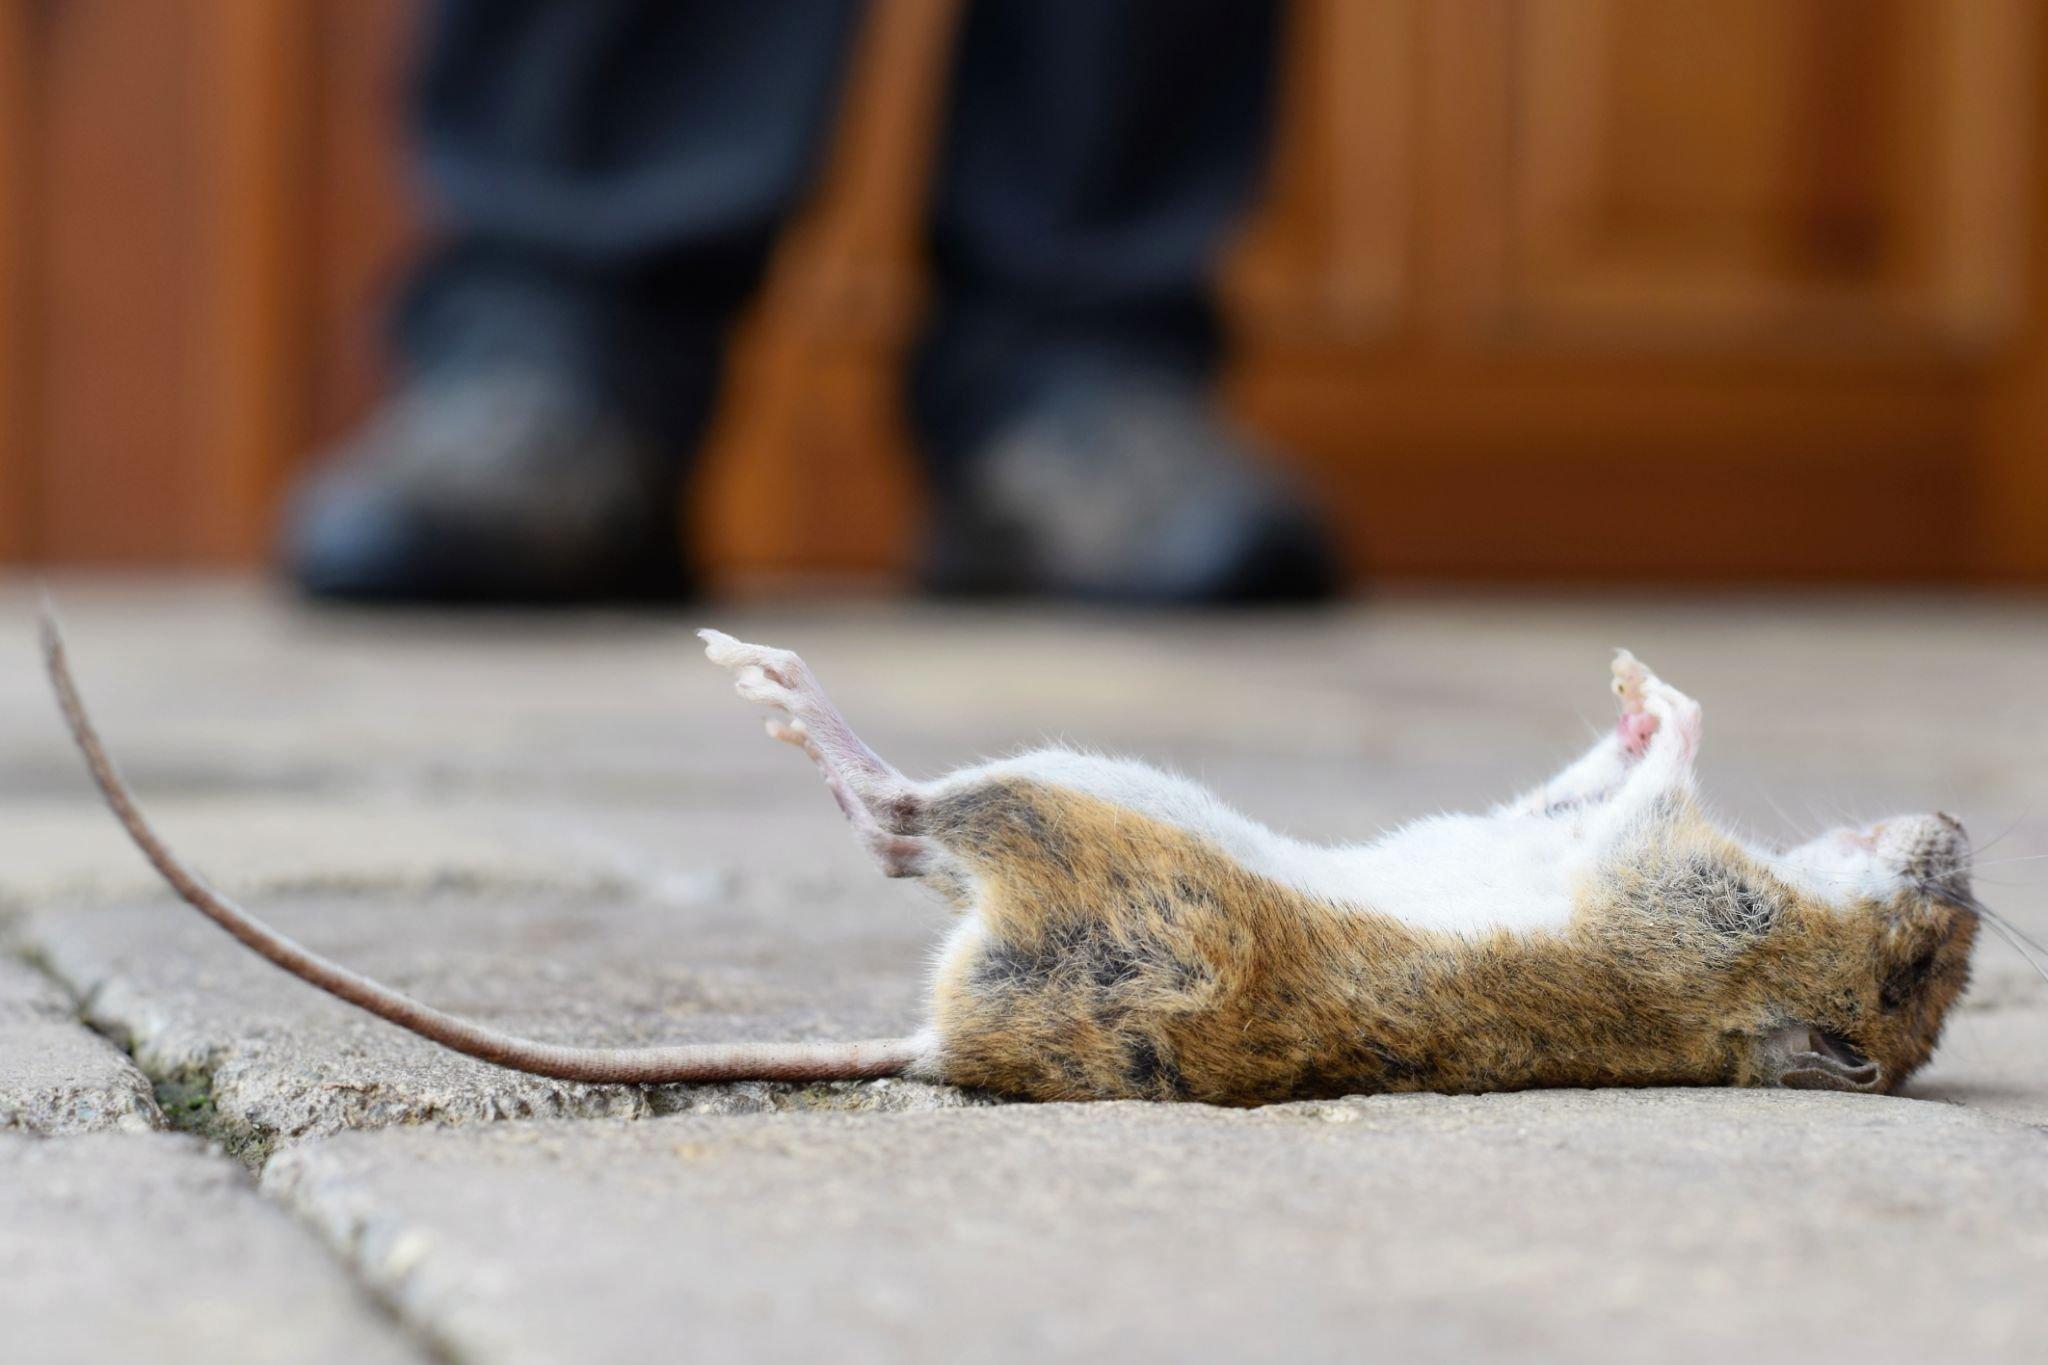 Rat Exterminator Services: The Best Way to Get Rid of Those Pests